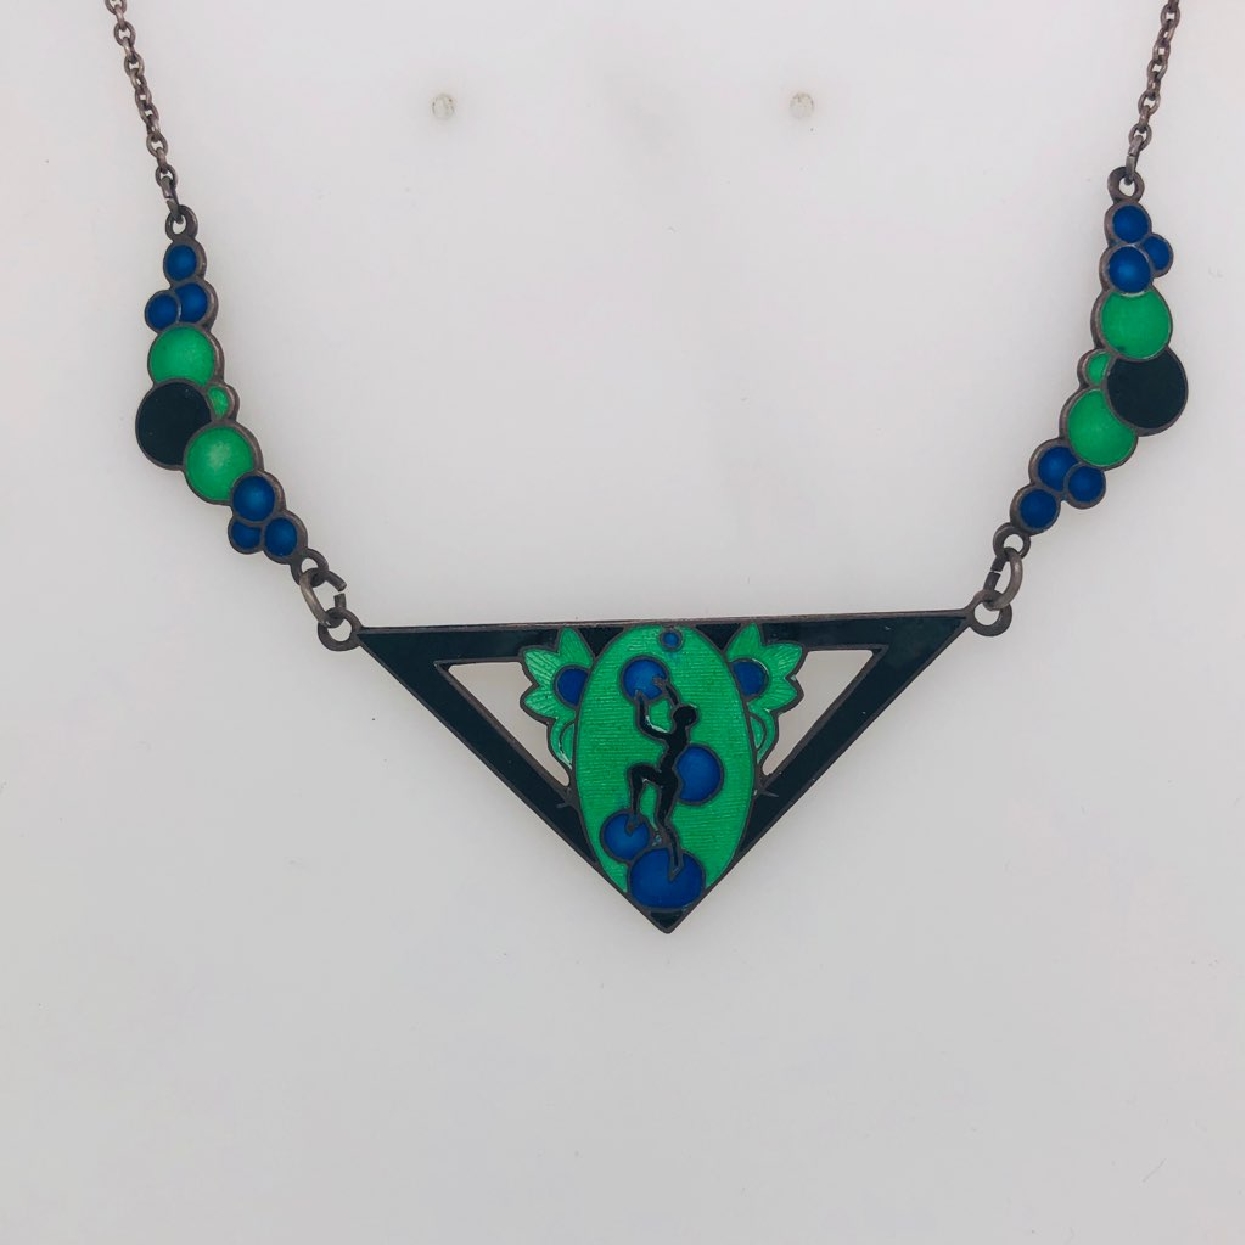 Sterling Silver Art Nouveau Revival Necklace with Blue; Green; and Black Enamel; 16 inches